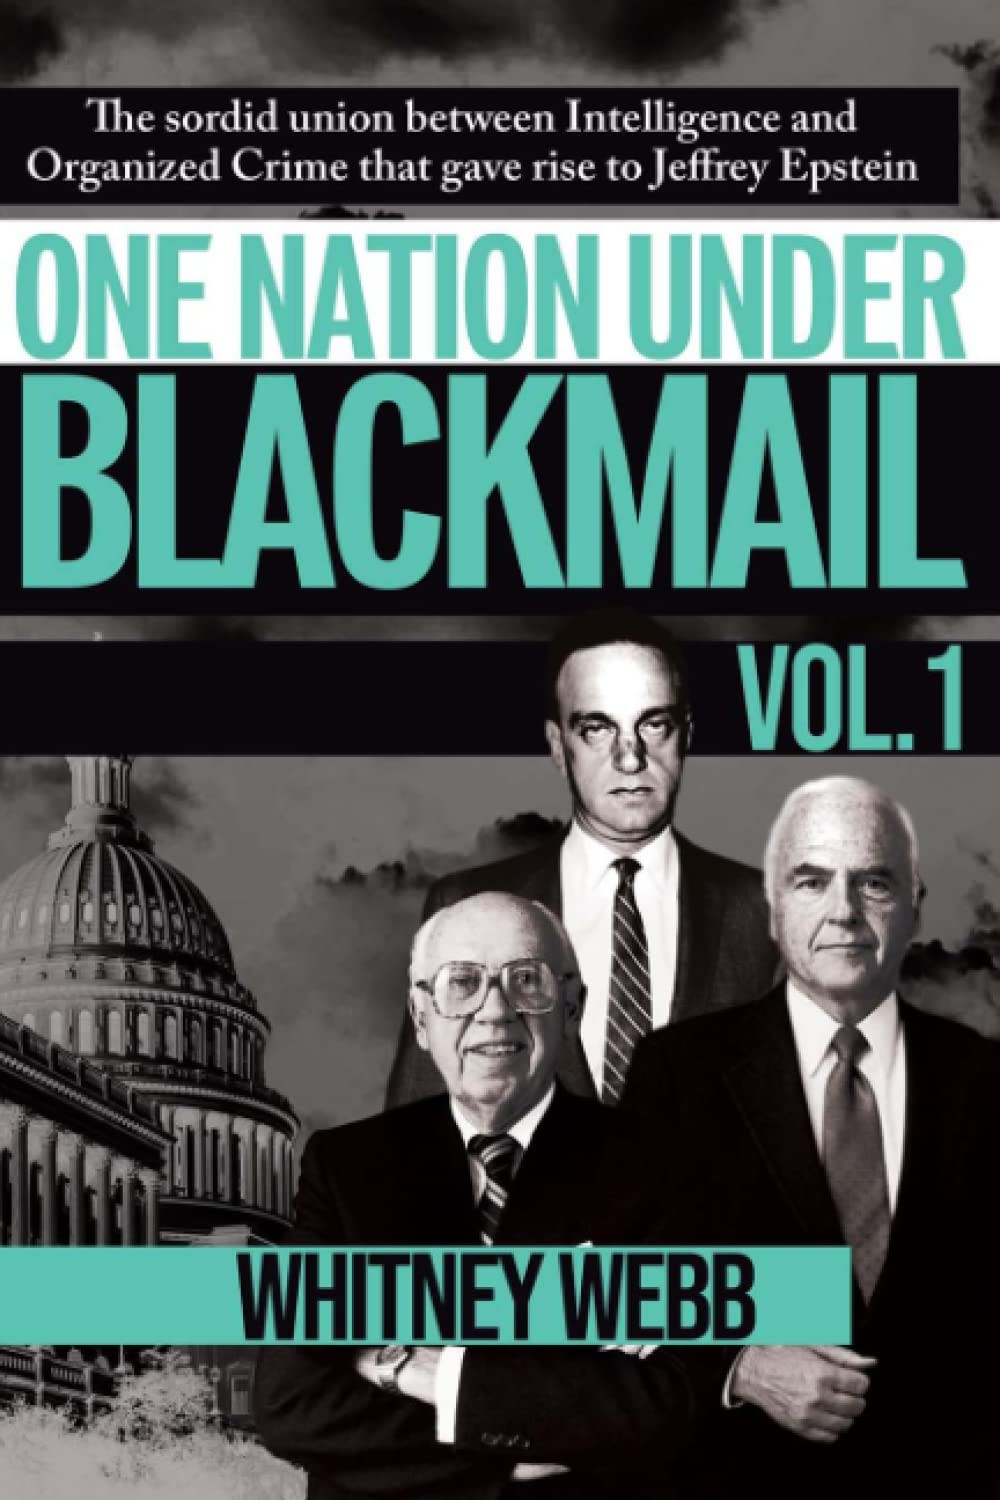 One Nation Under Blackmail - Vol. 1: The Sordid Union Between Intelligence and Crime That Gave Rise to Jeffrey Epstein, VOL.1